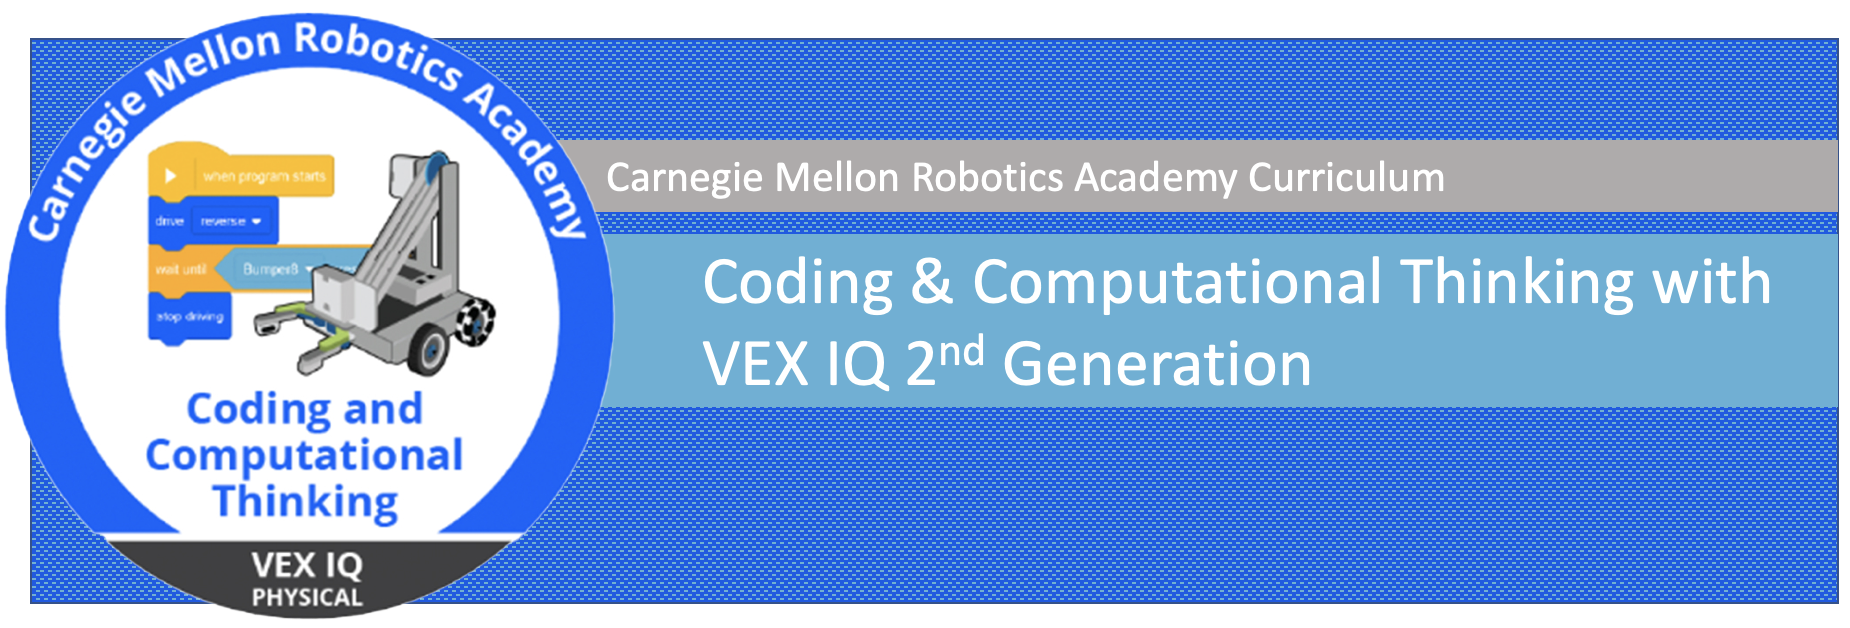 Coding and Computational Thinking with VEX IQ 2nd Generation